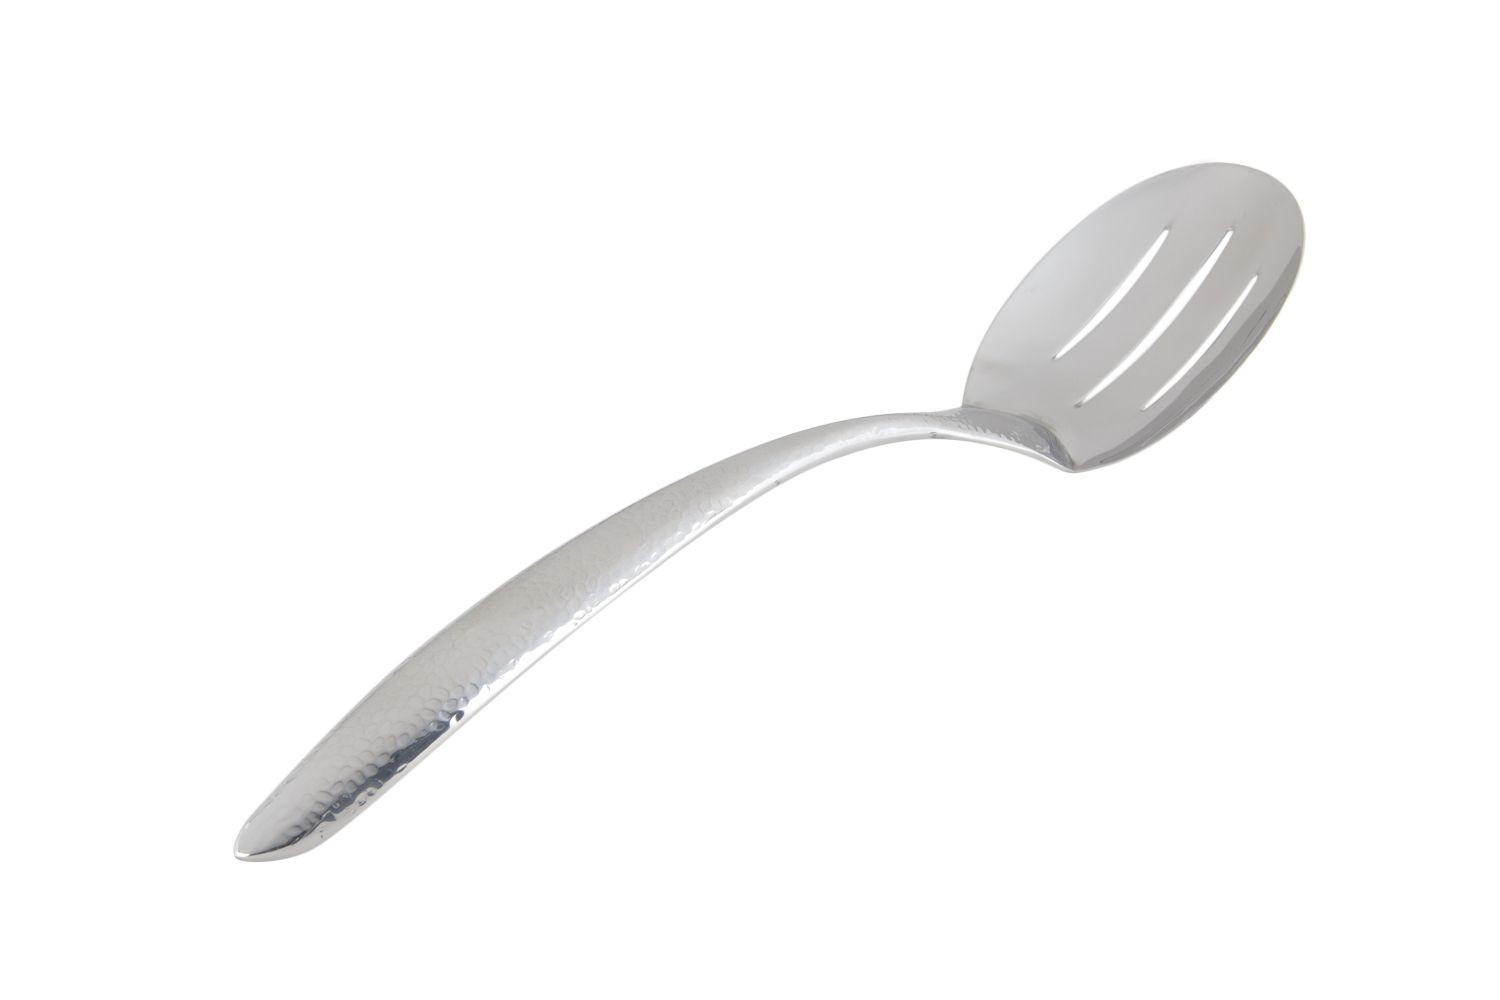 Bon Chef 9458HF EZ Use Banquet Serving Slotted Spoon with Hammered Finish, 13 1/2"